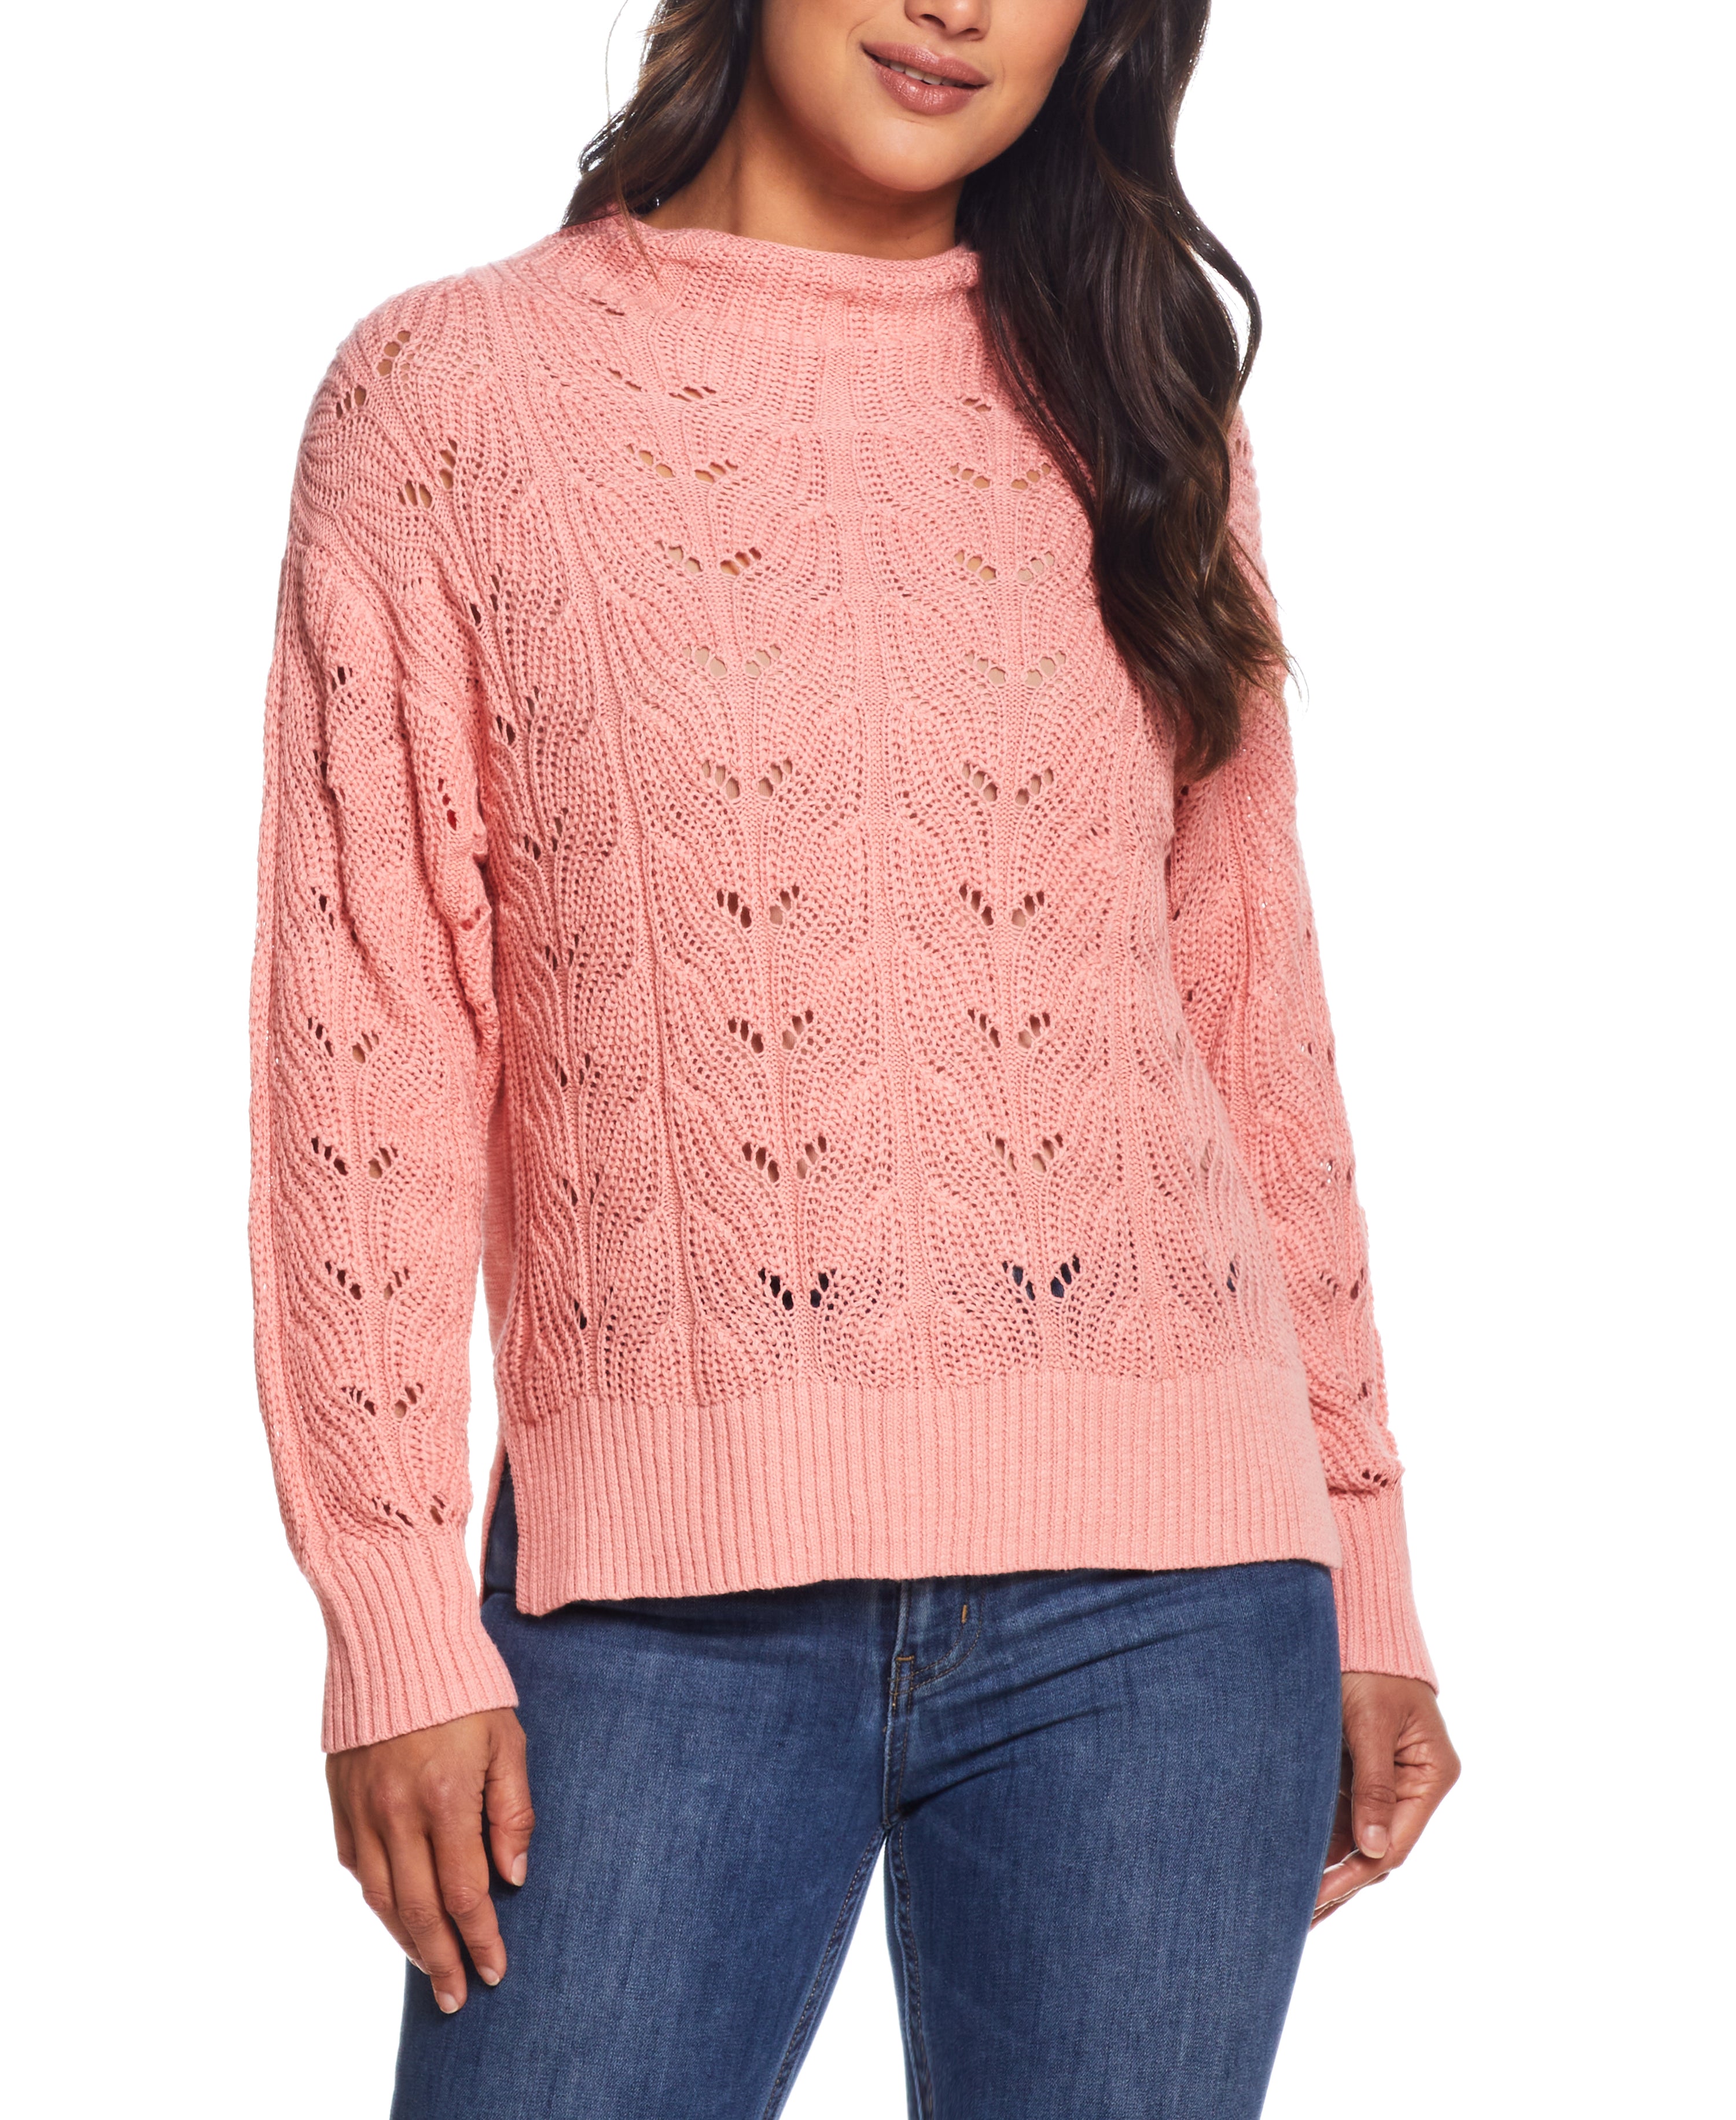 Ladies Pointelle Mock-neck Sweater in Coral